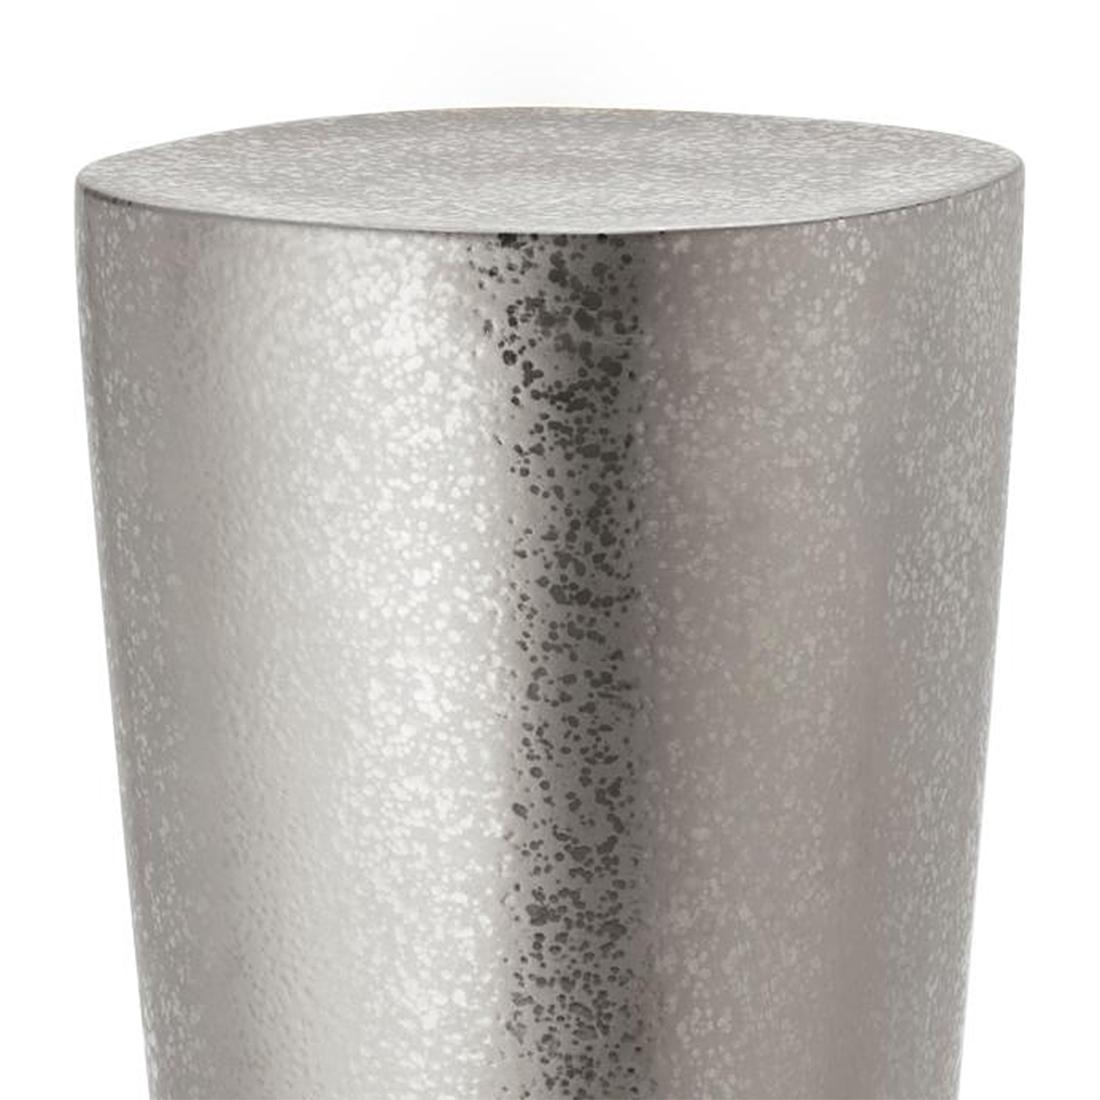 Stool platine earth in earthenware
in platine finish.
Also available in gold 24-karat finish.